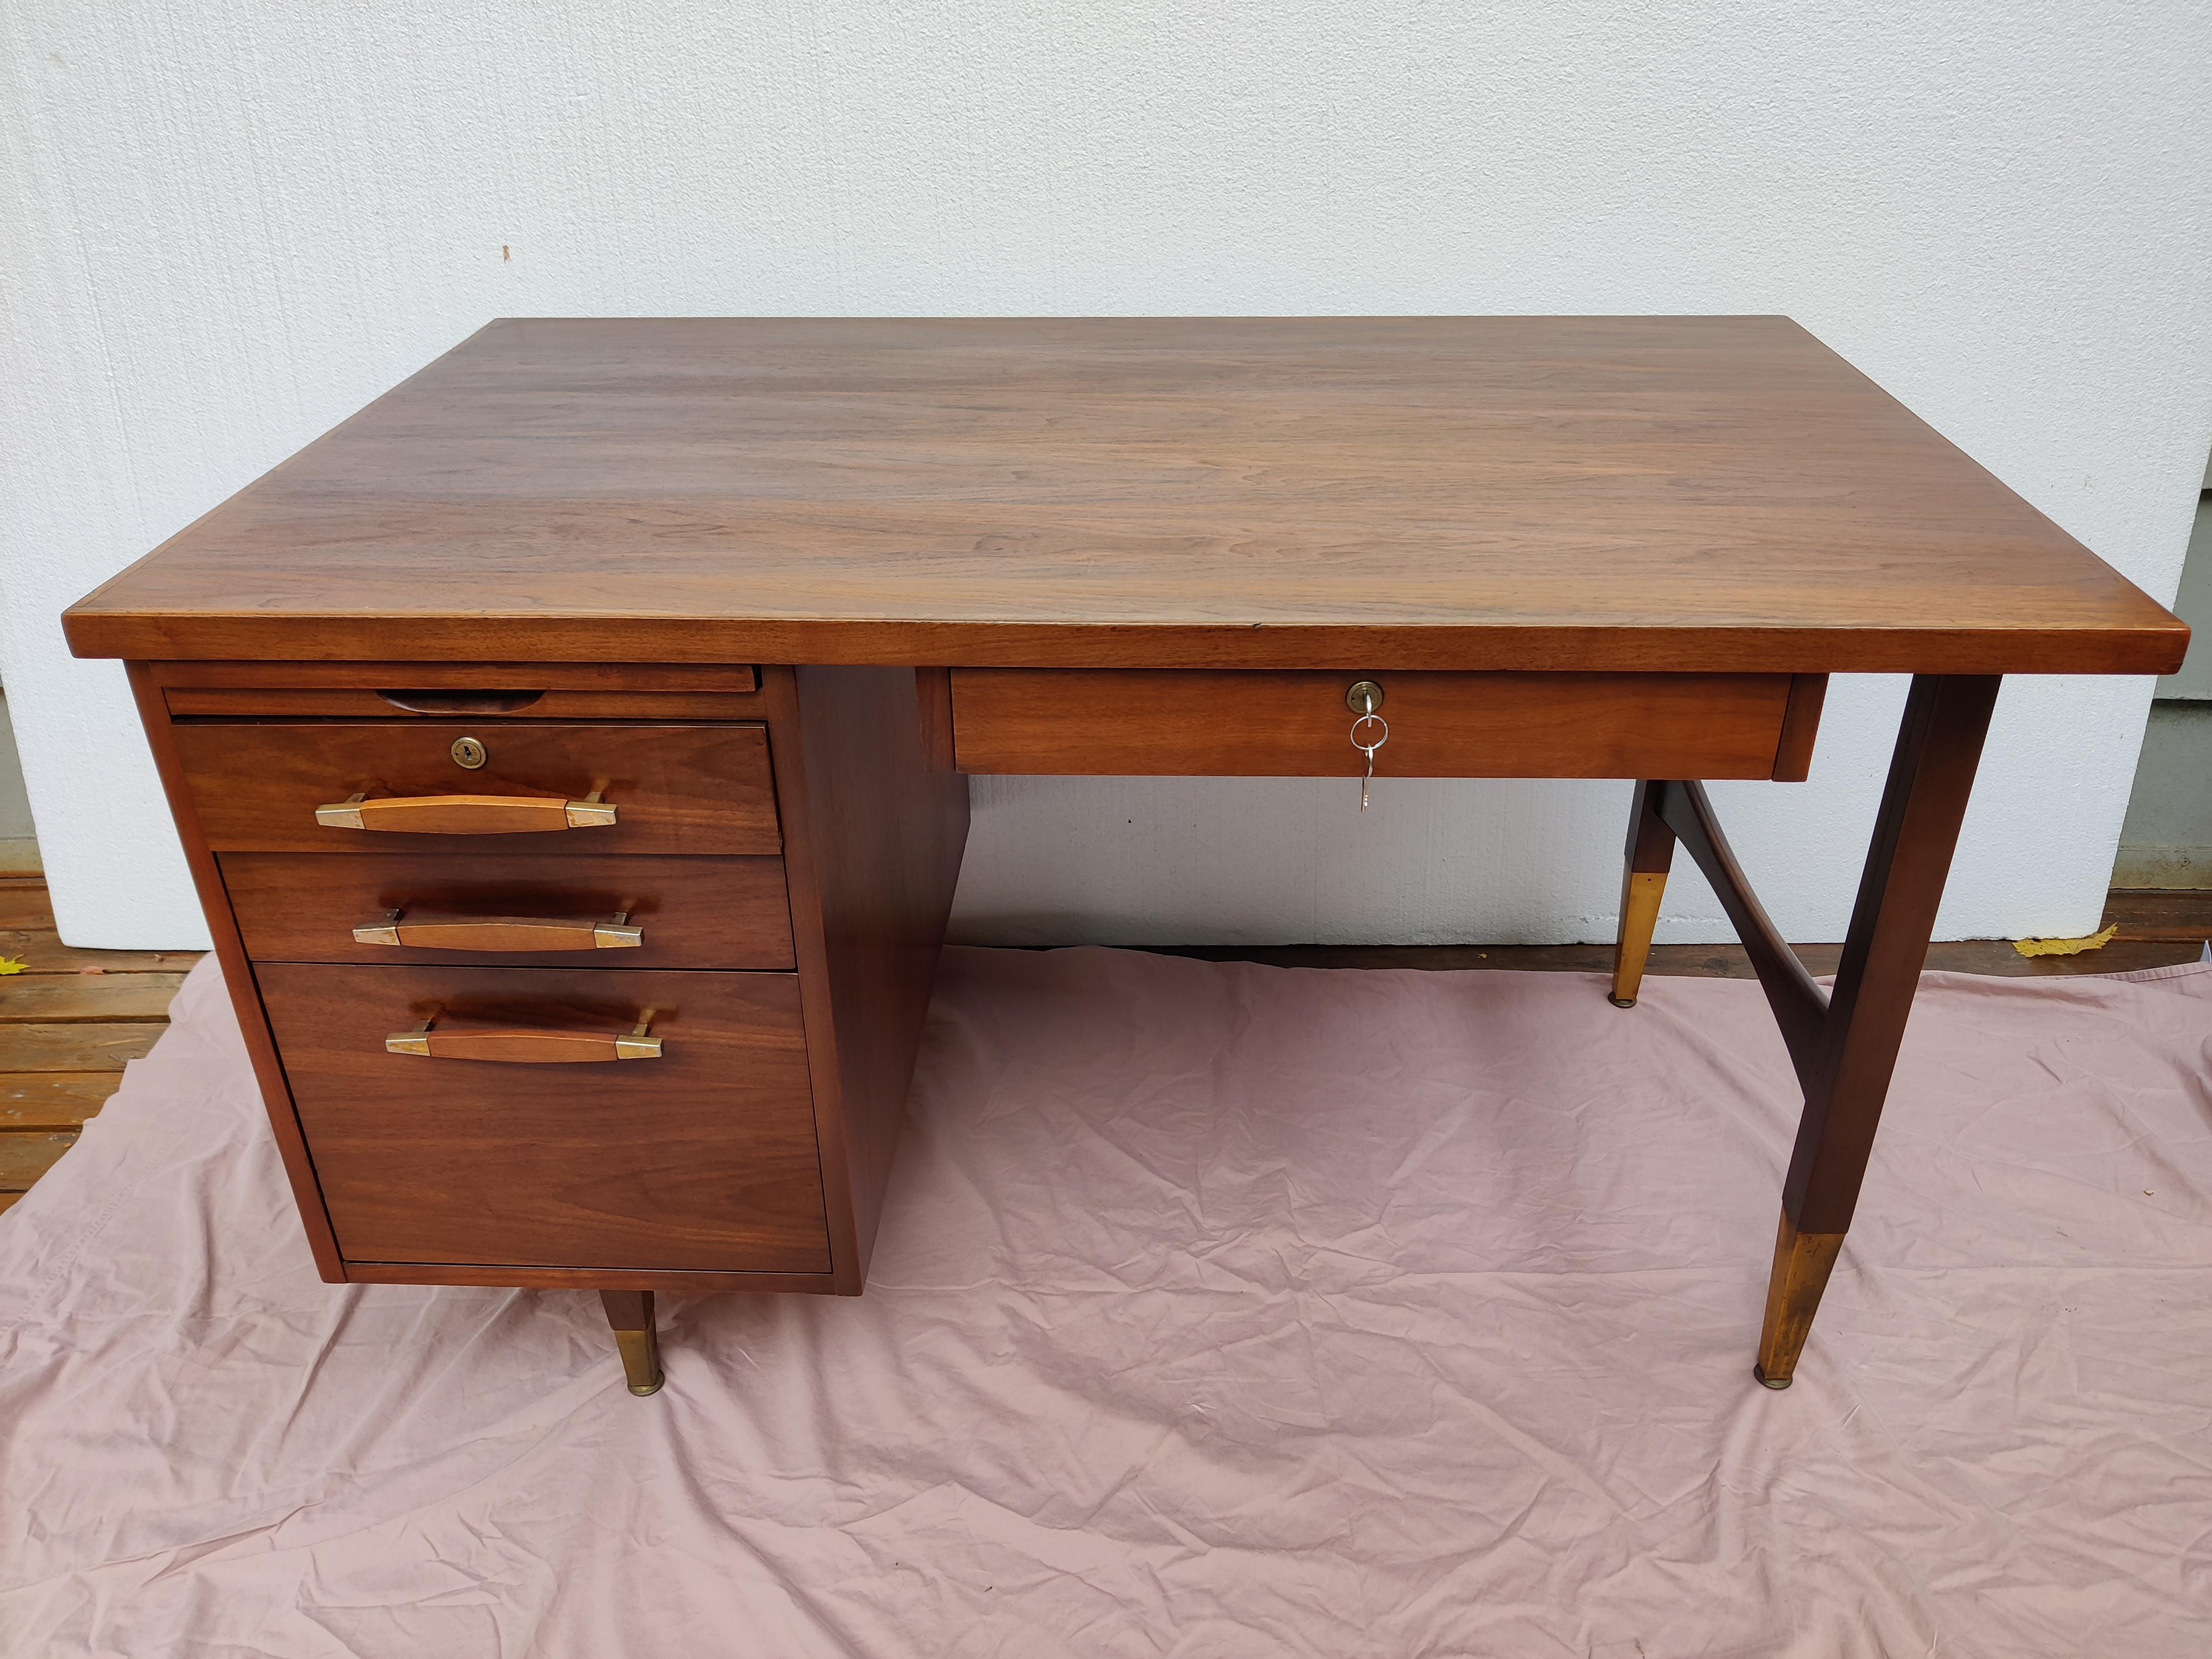 Mid Century Modern Walnut Desk with brass and walnut pulls'
Brass caps on legs
Chair opening 28.25 W x 25 H (drawer bottom to floor).
2 locks with 2 keys each.
Touch up only on desk, original finish in good condition. 